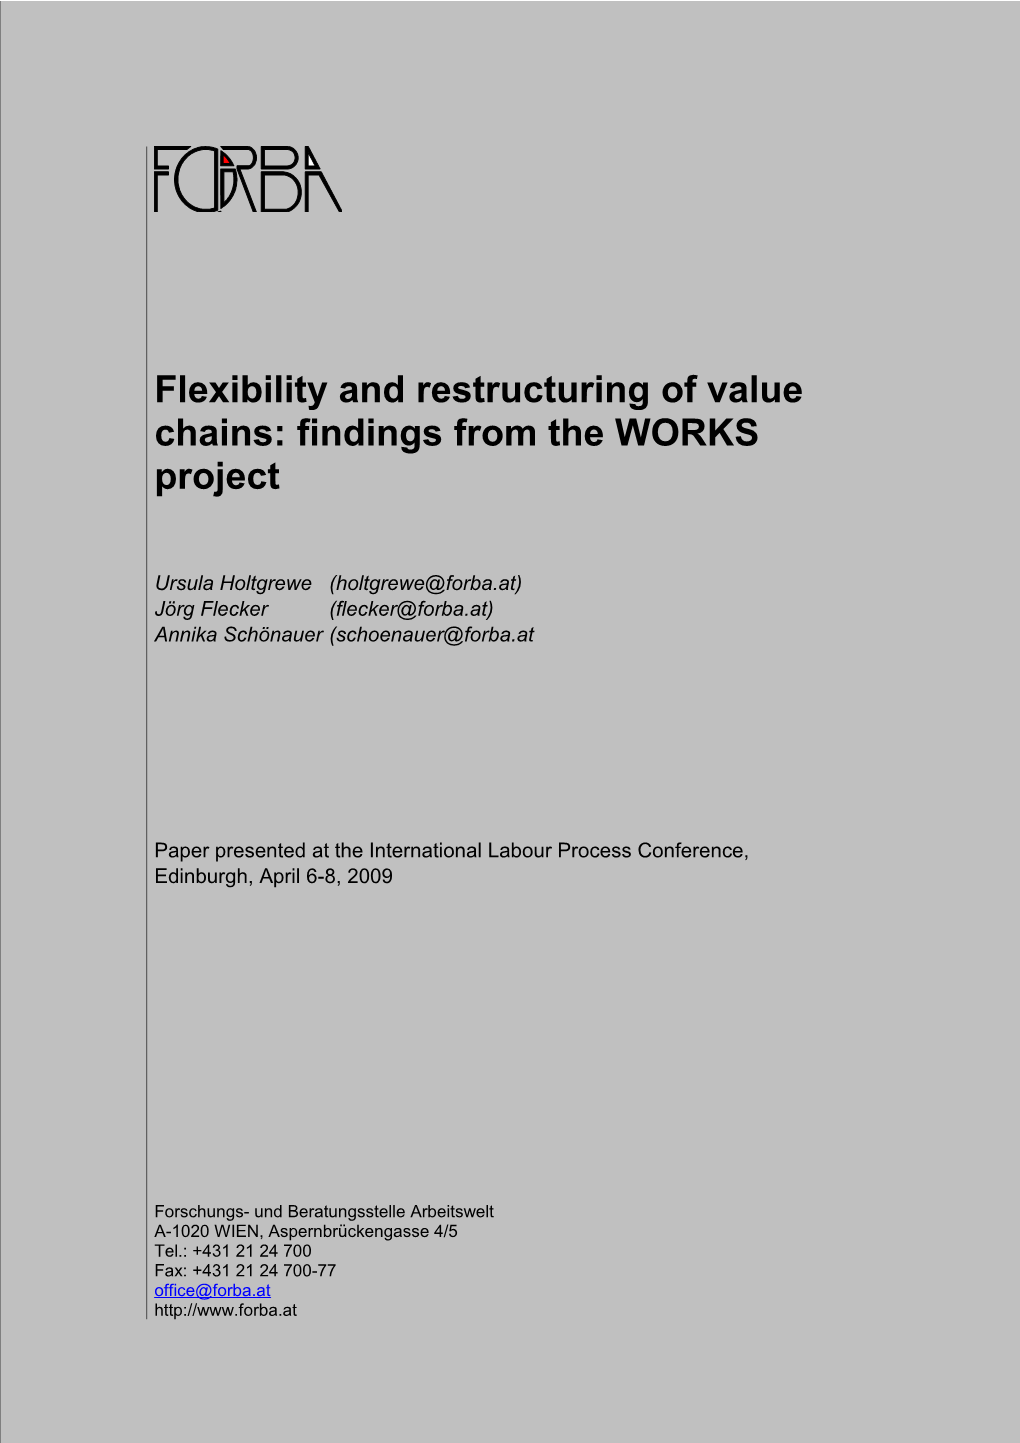 Flexibility and Restructuring of Value Chains: Findings from the WORKS Project